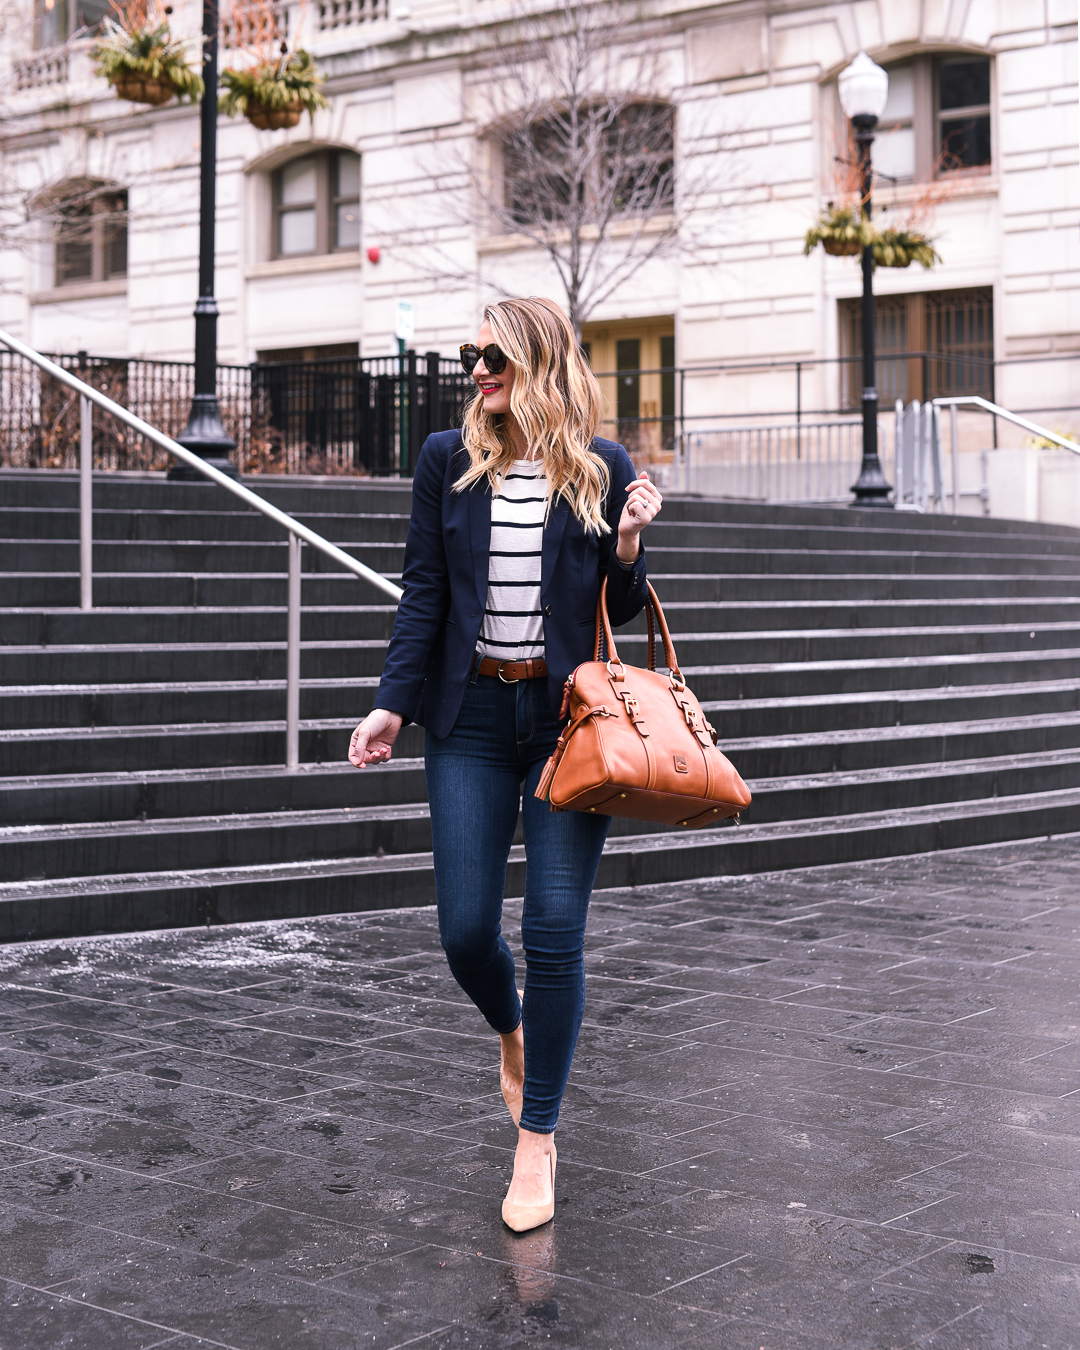 j.crew parke blazer in navy from nordstrom - work life balance tips by popular Chicago lifestyle blogger Visions of Vogue